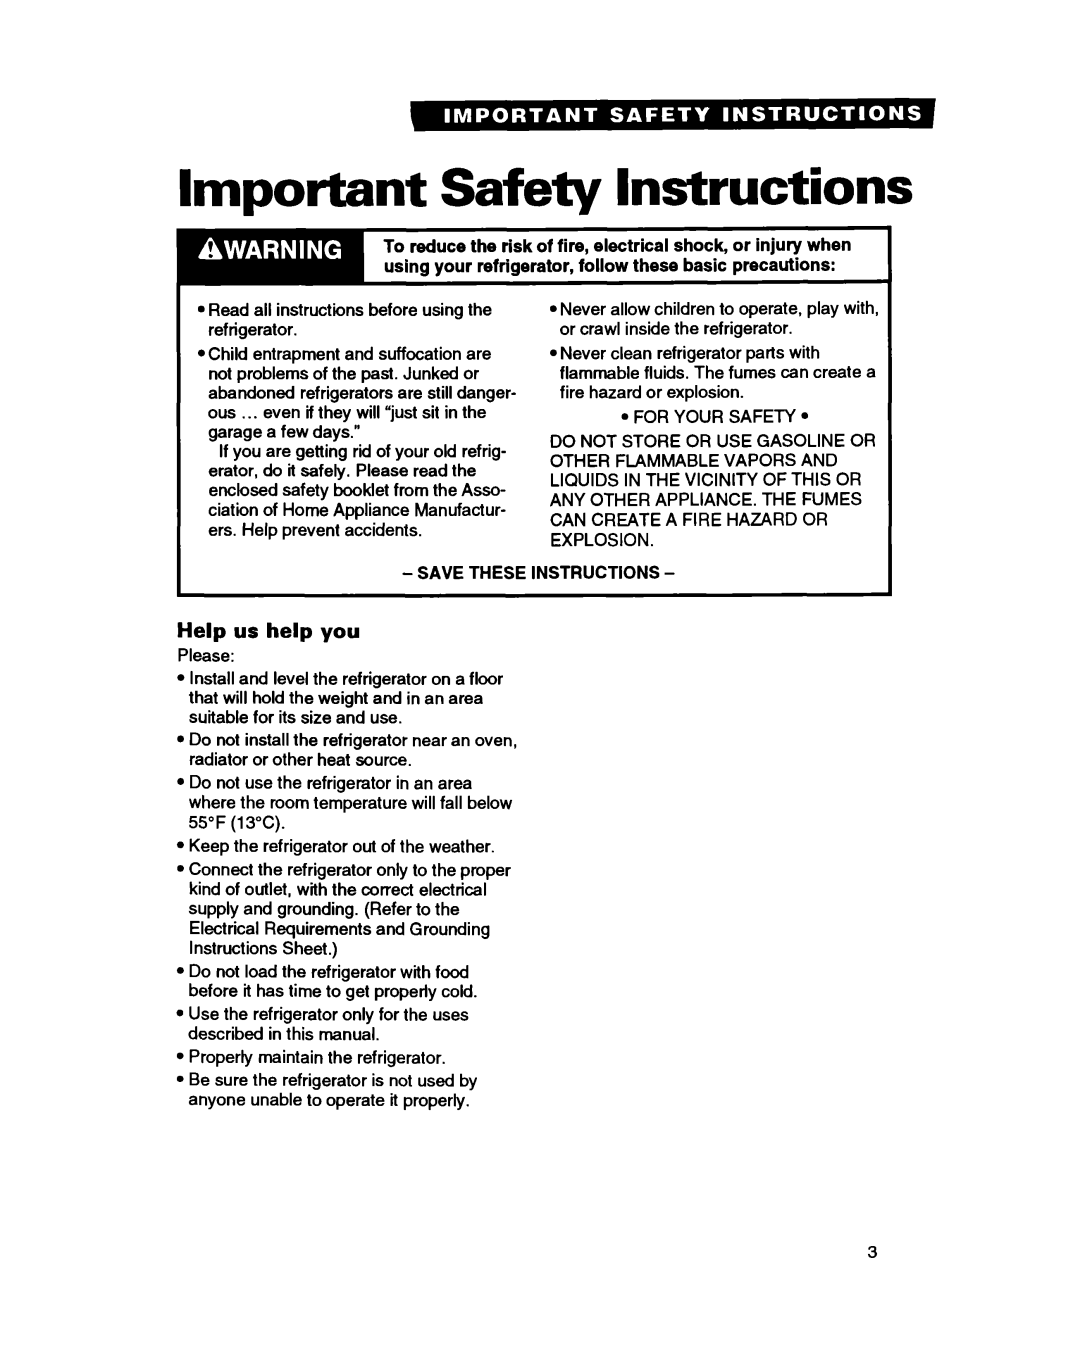 Whirlpool RT20AK, RT18BM, RT18DK, RT18AK, RT20BK Important Safety Instructions, Help us help you, Save These Instructions 